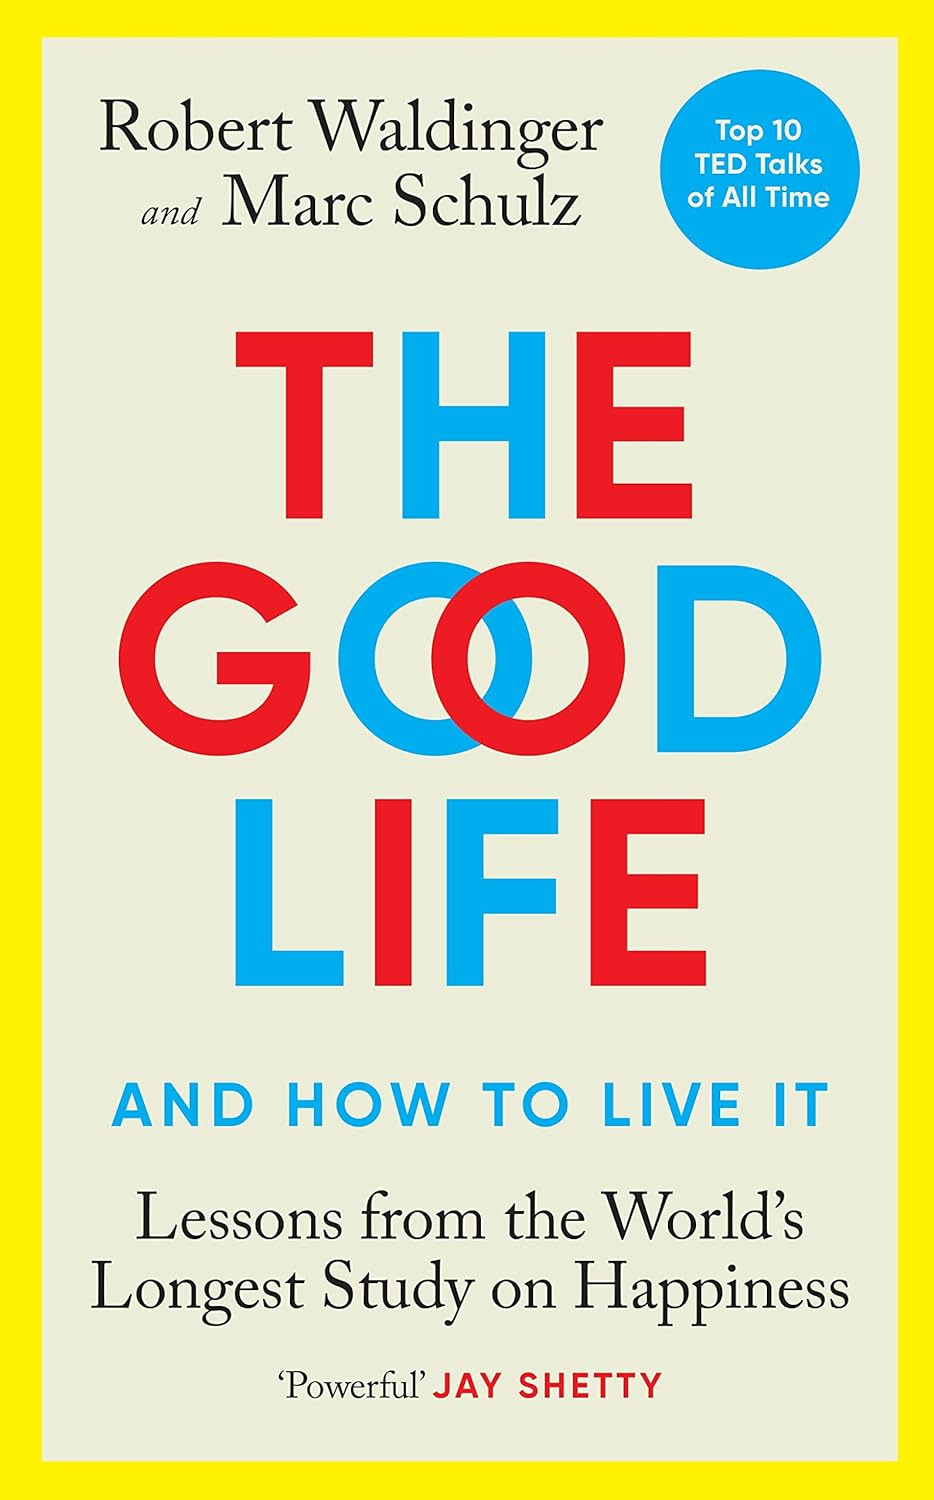 Book cover "The Good life"